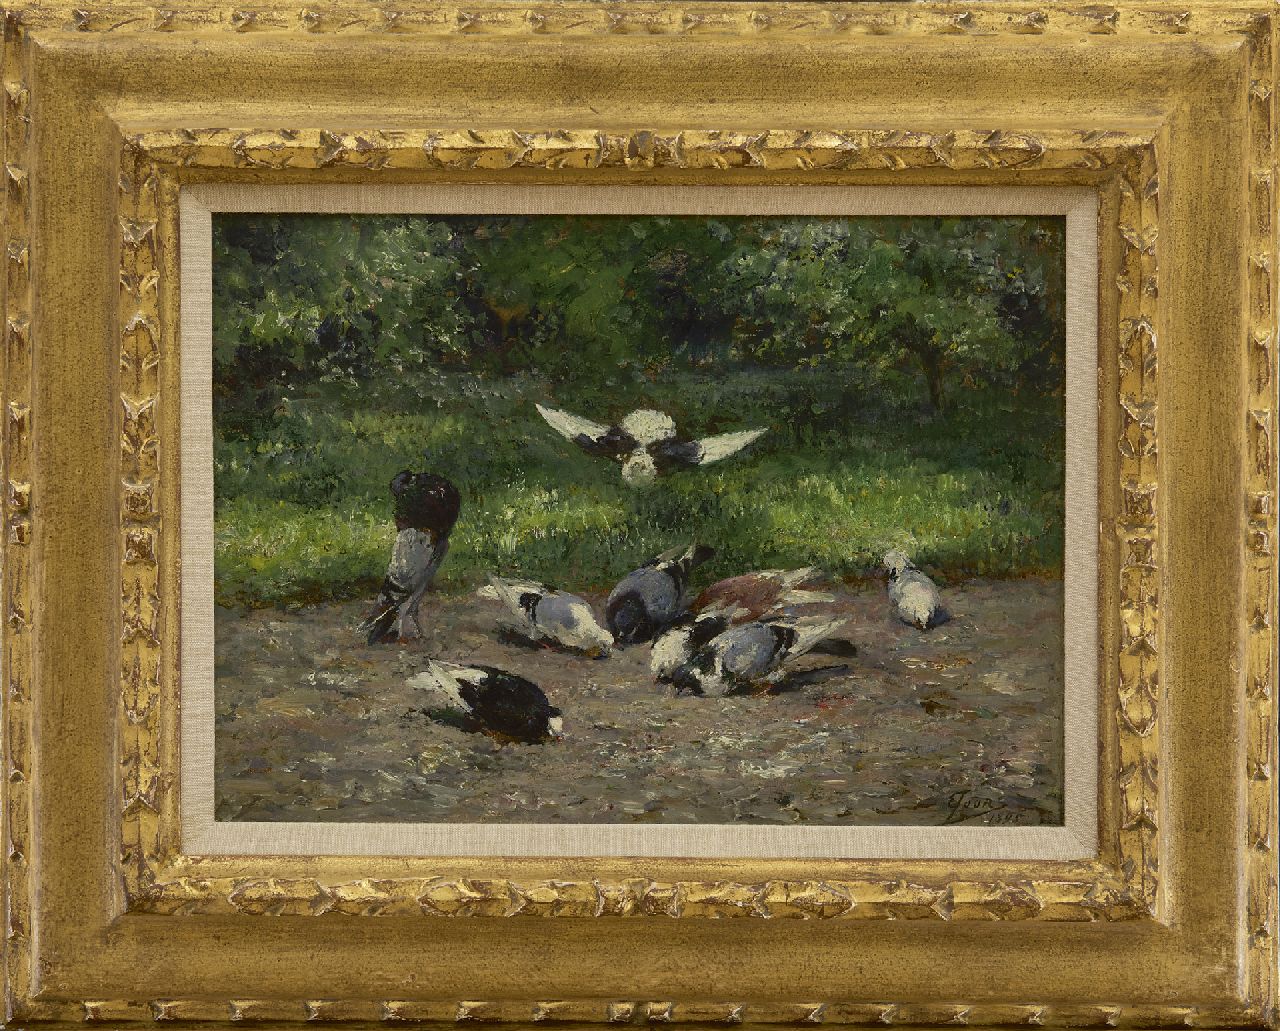 Joors E.  | Eugeen Joors, Pigeons in the park, oil on panel 24.0 x 32.5 cm, signed l.r. and dated 1895